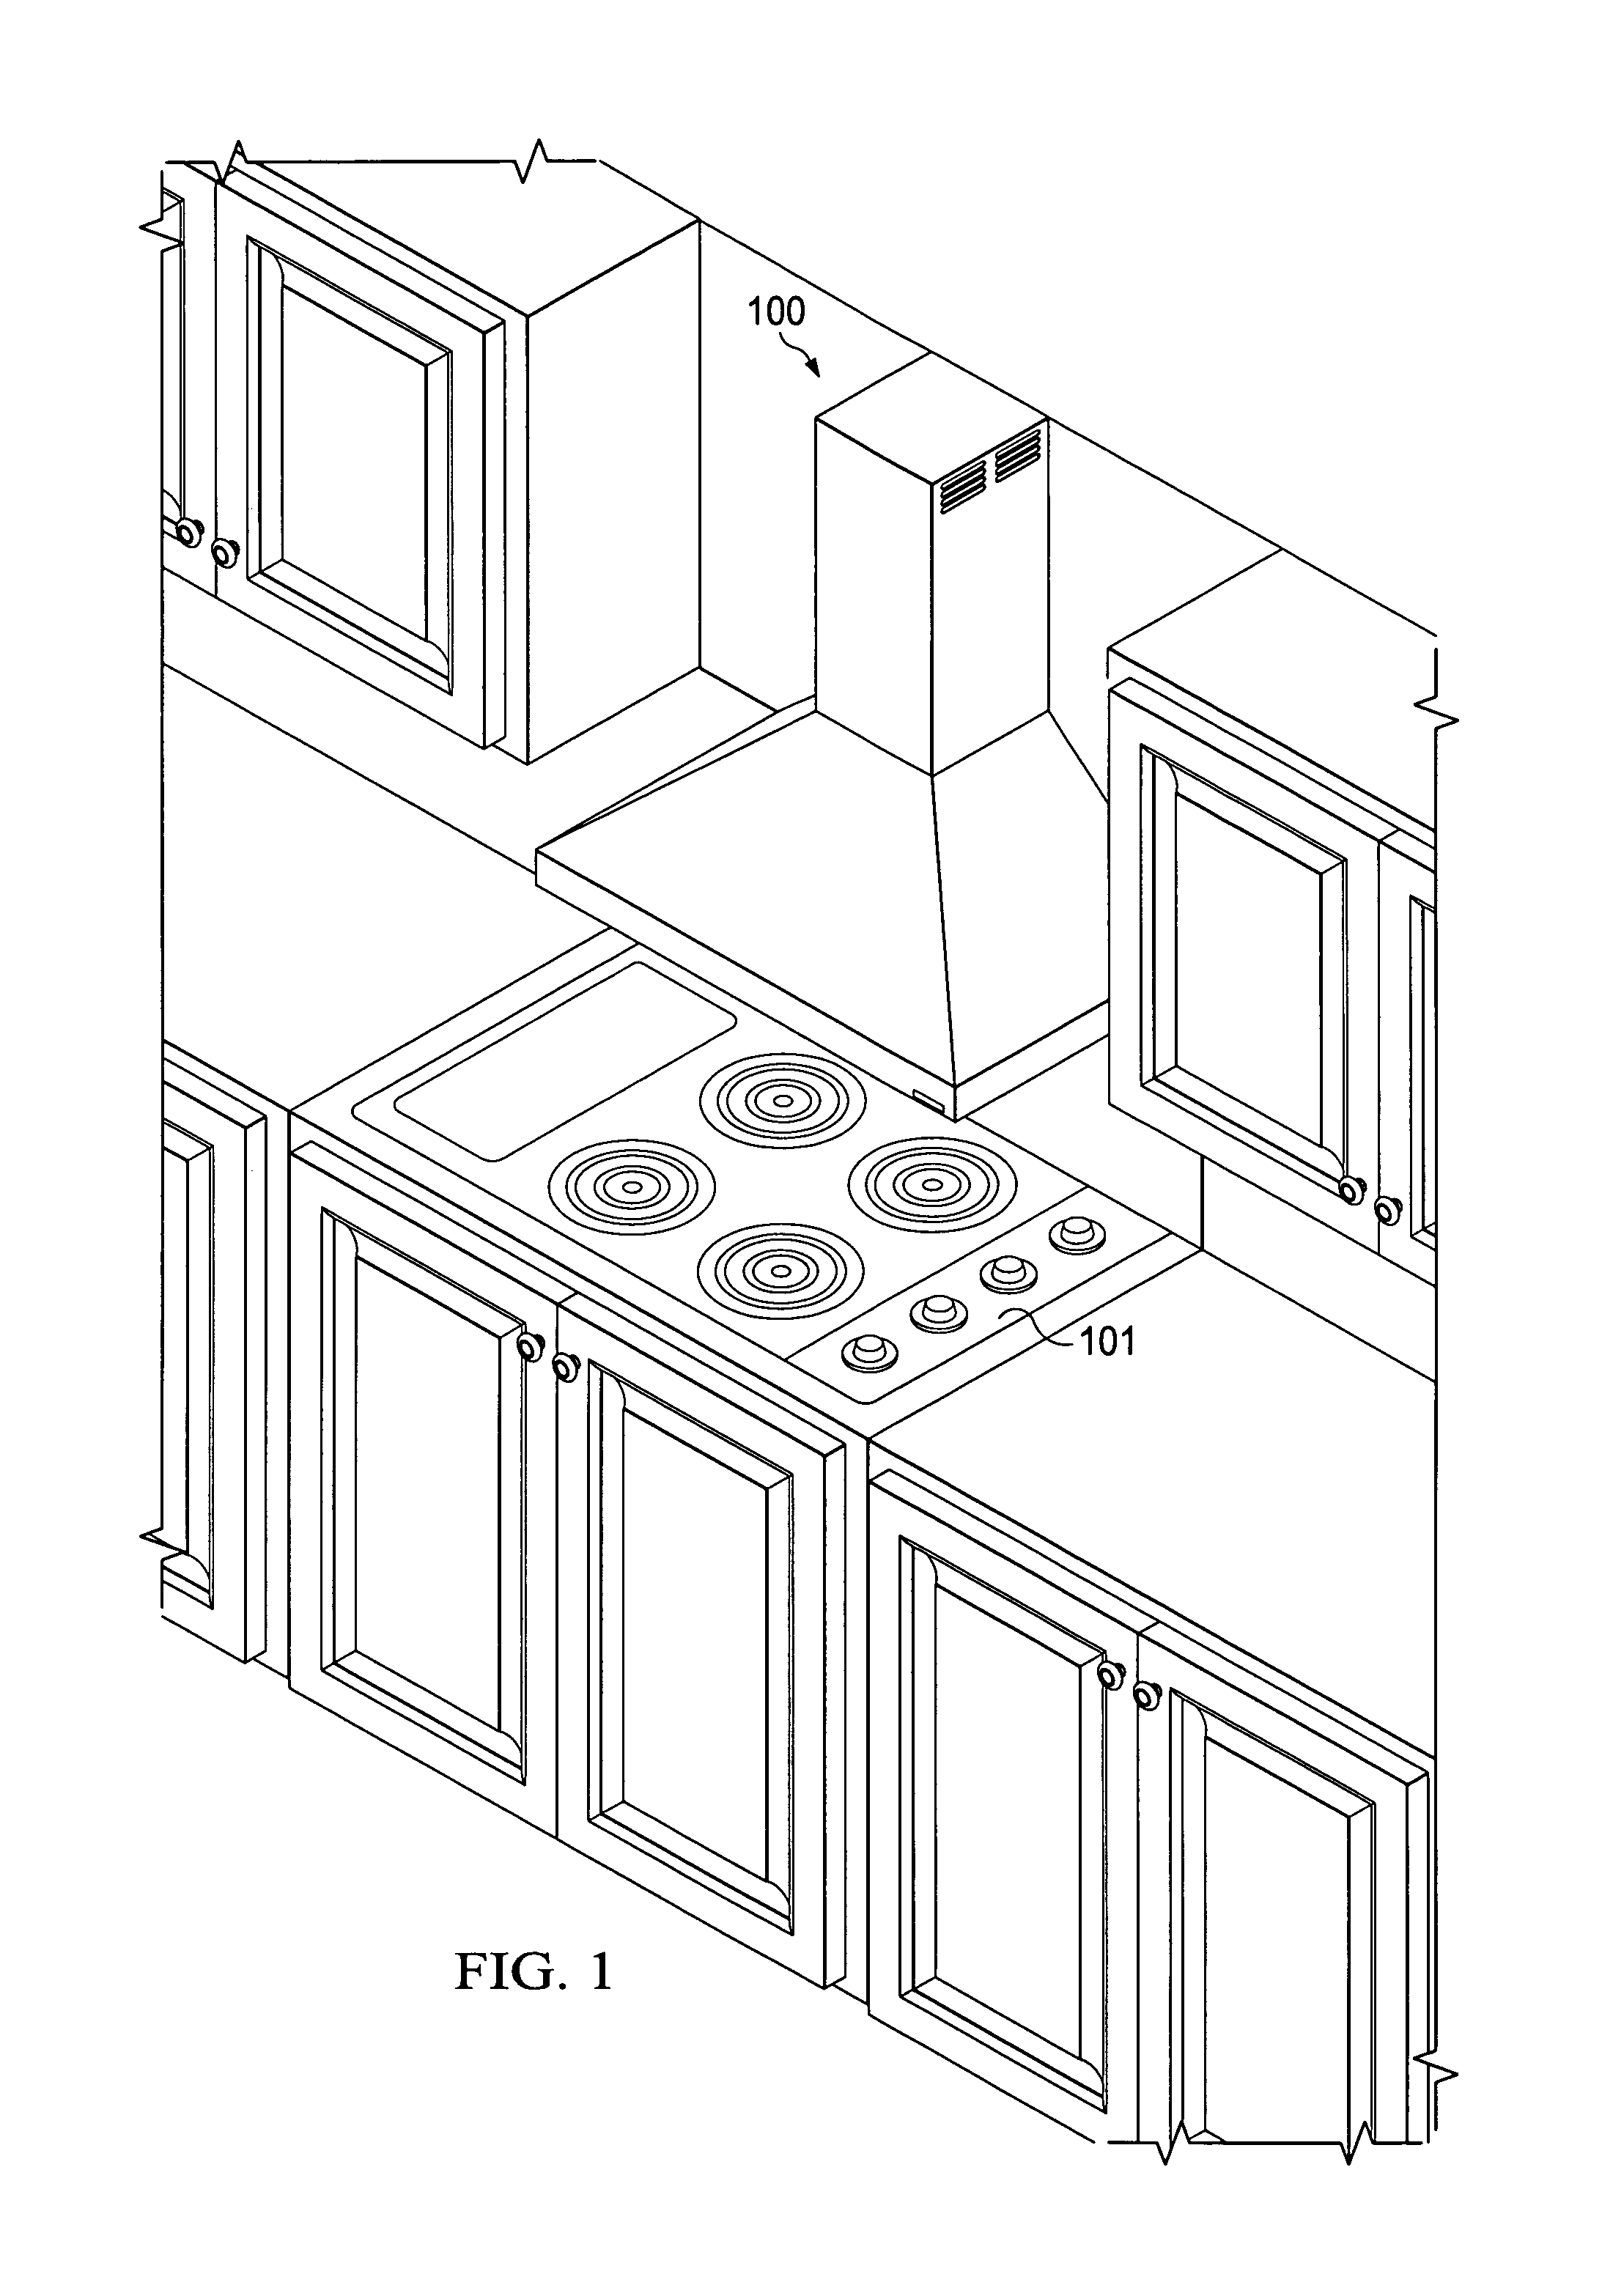 Duct-free cooking air filtration systems and methods